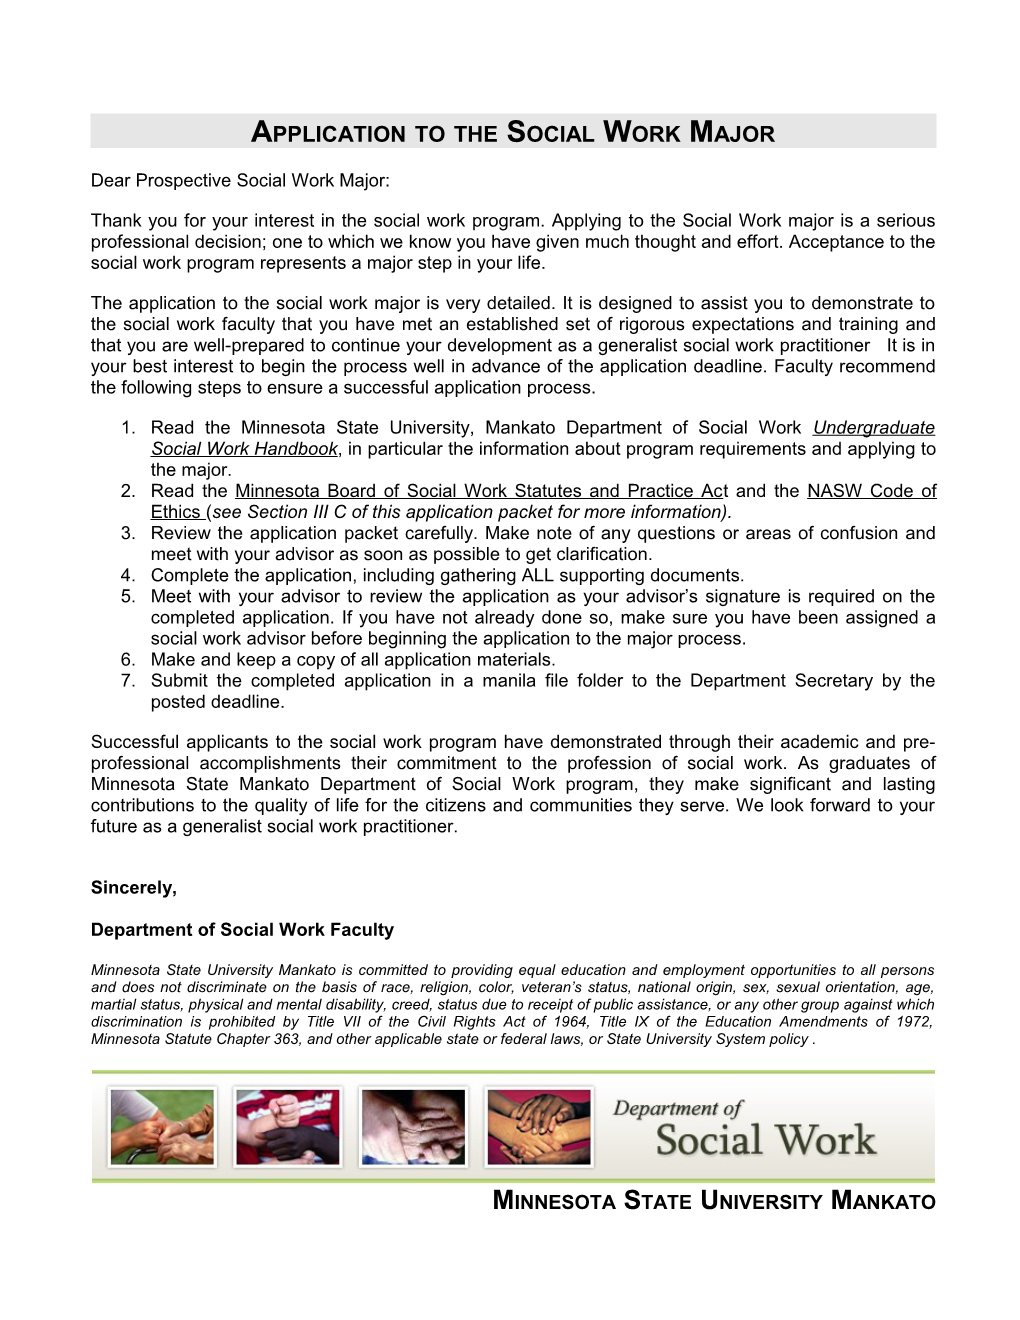 Application for Admission to the Social Work Major